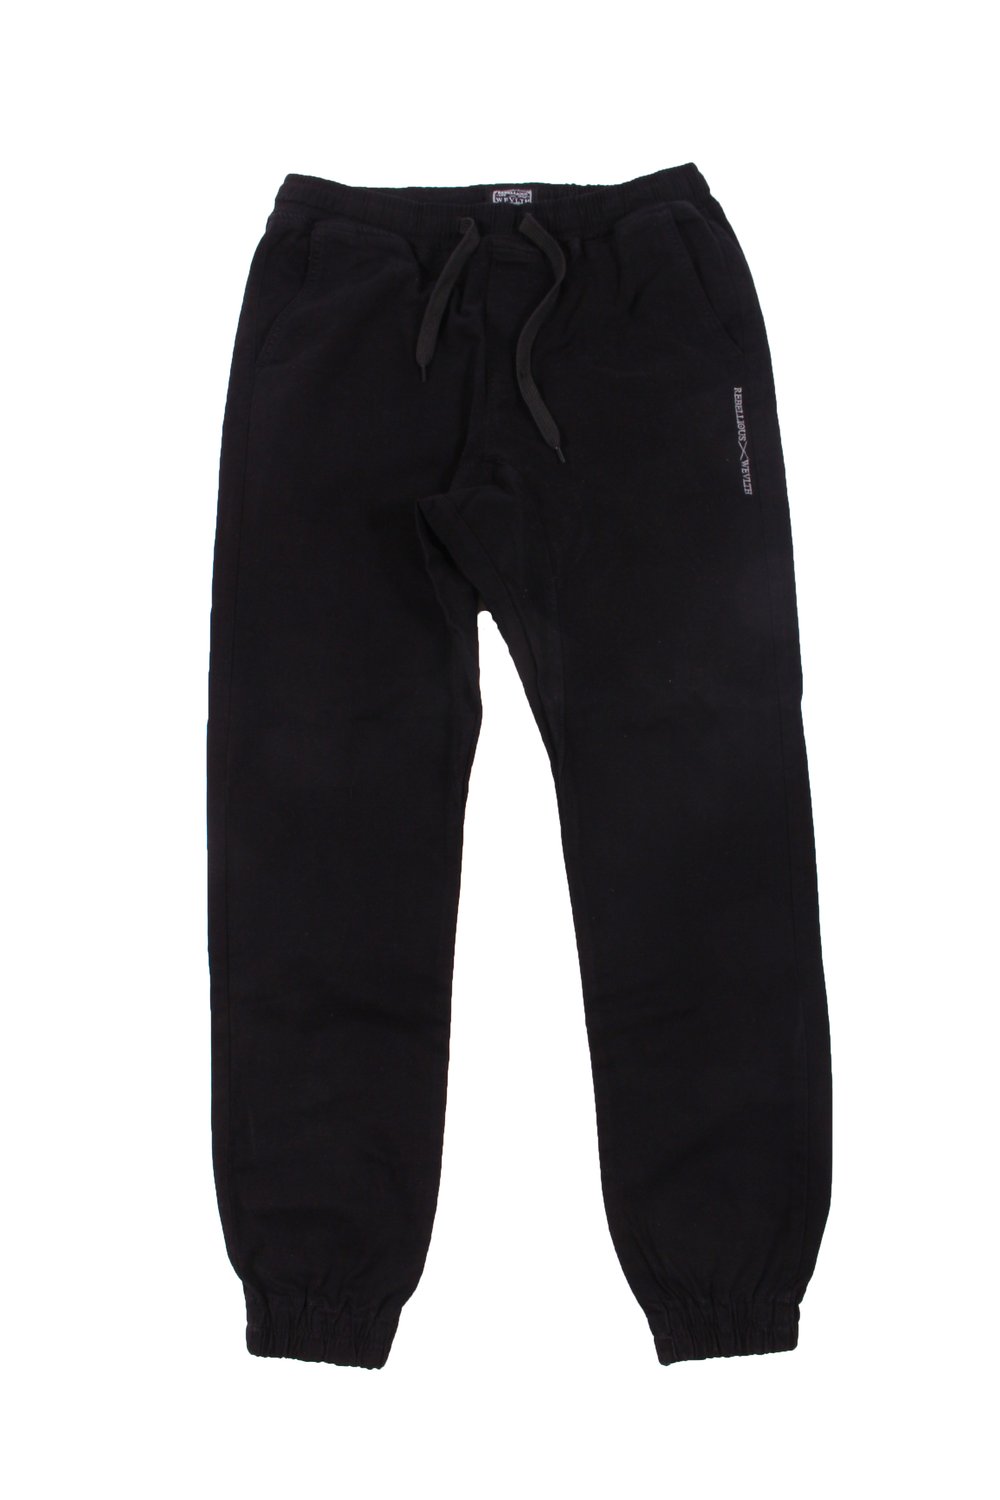 Image of RWLS Cotton Twill Joggers Black